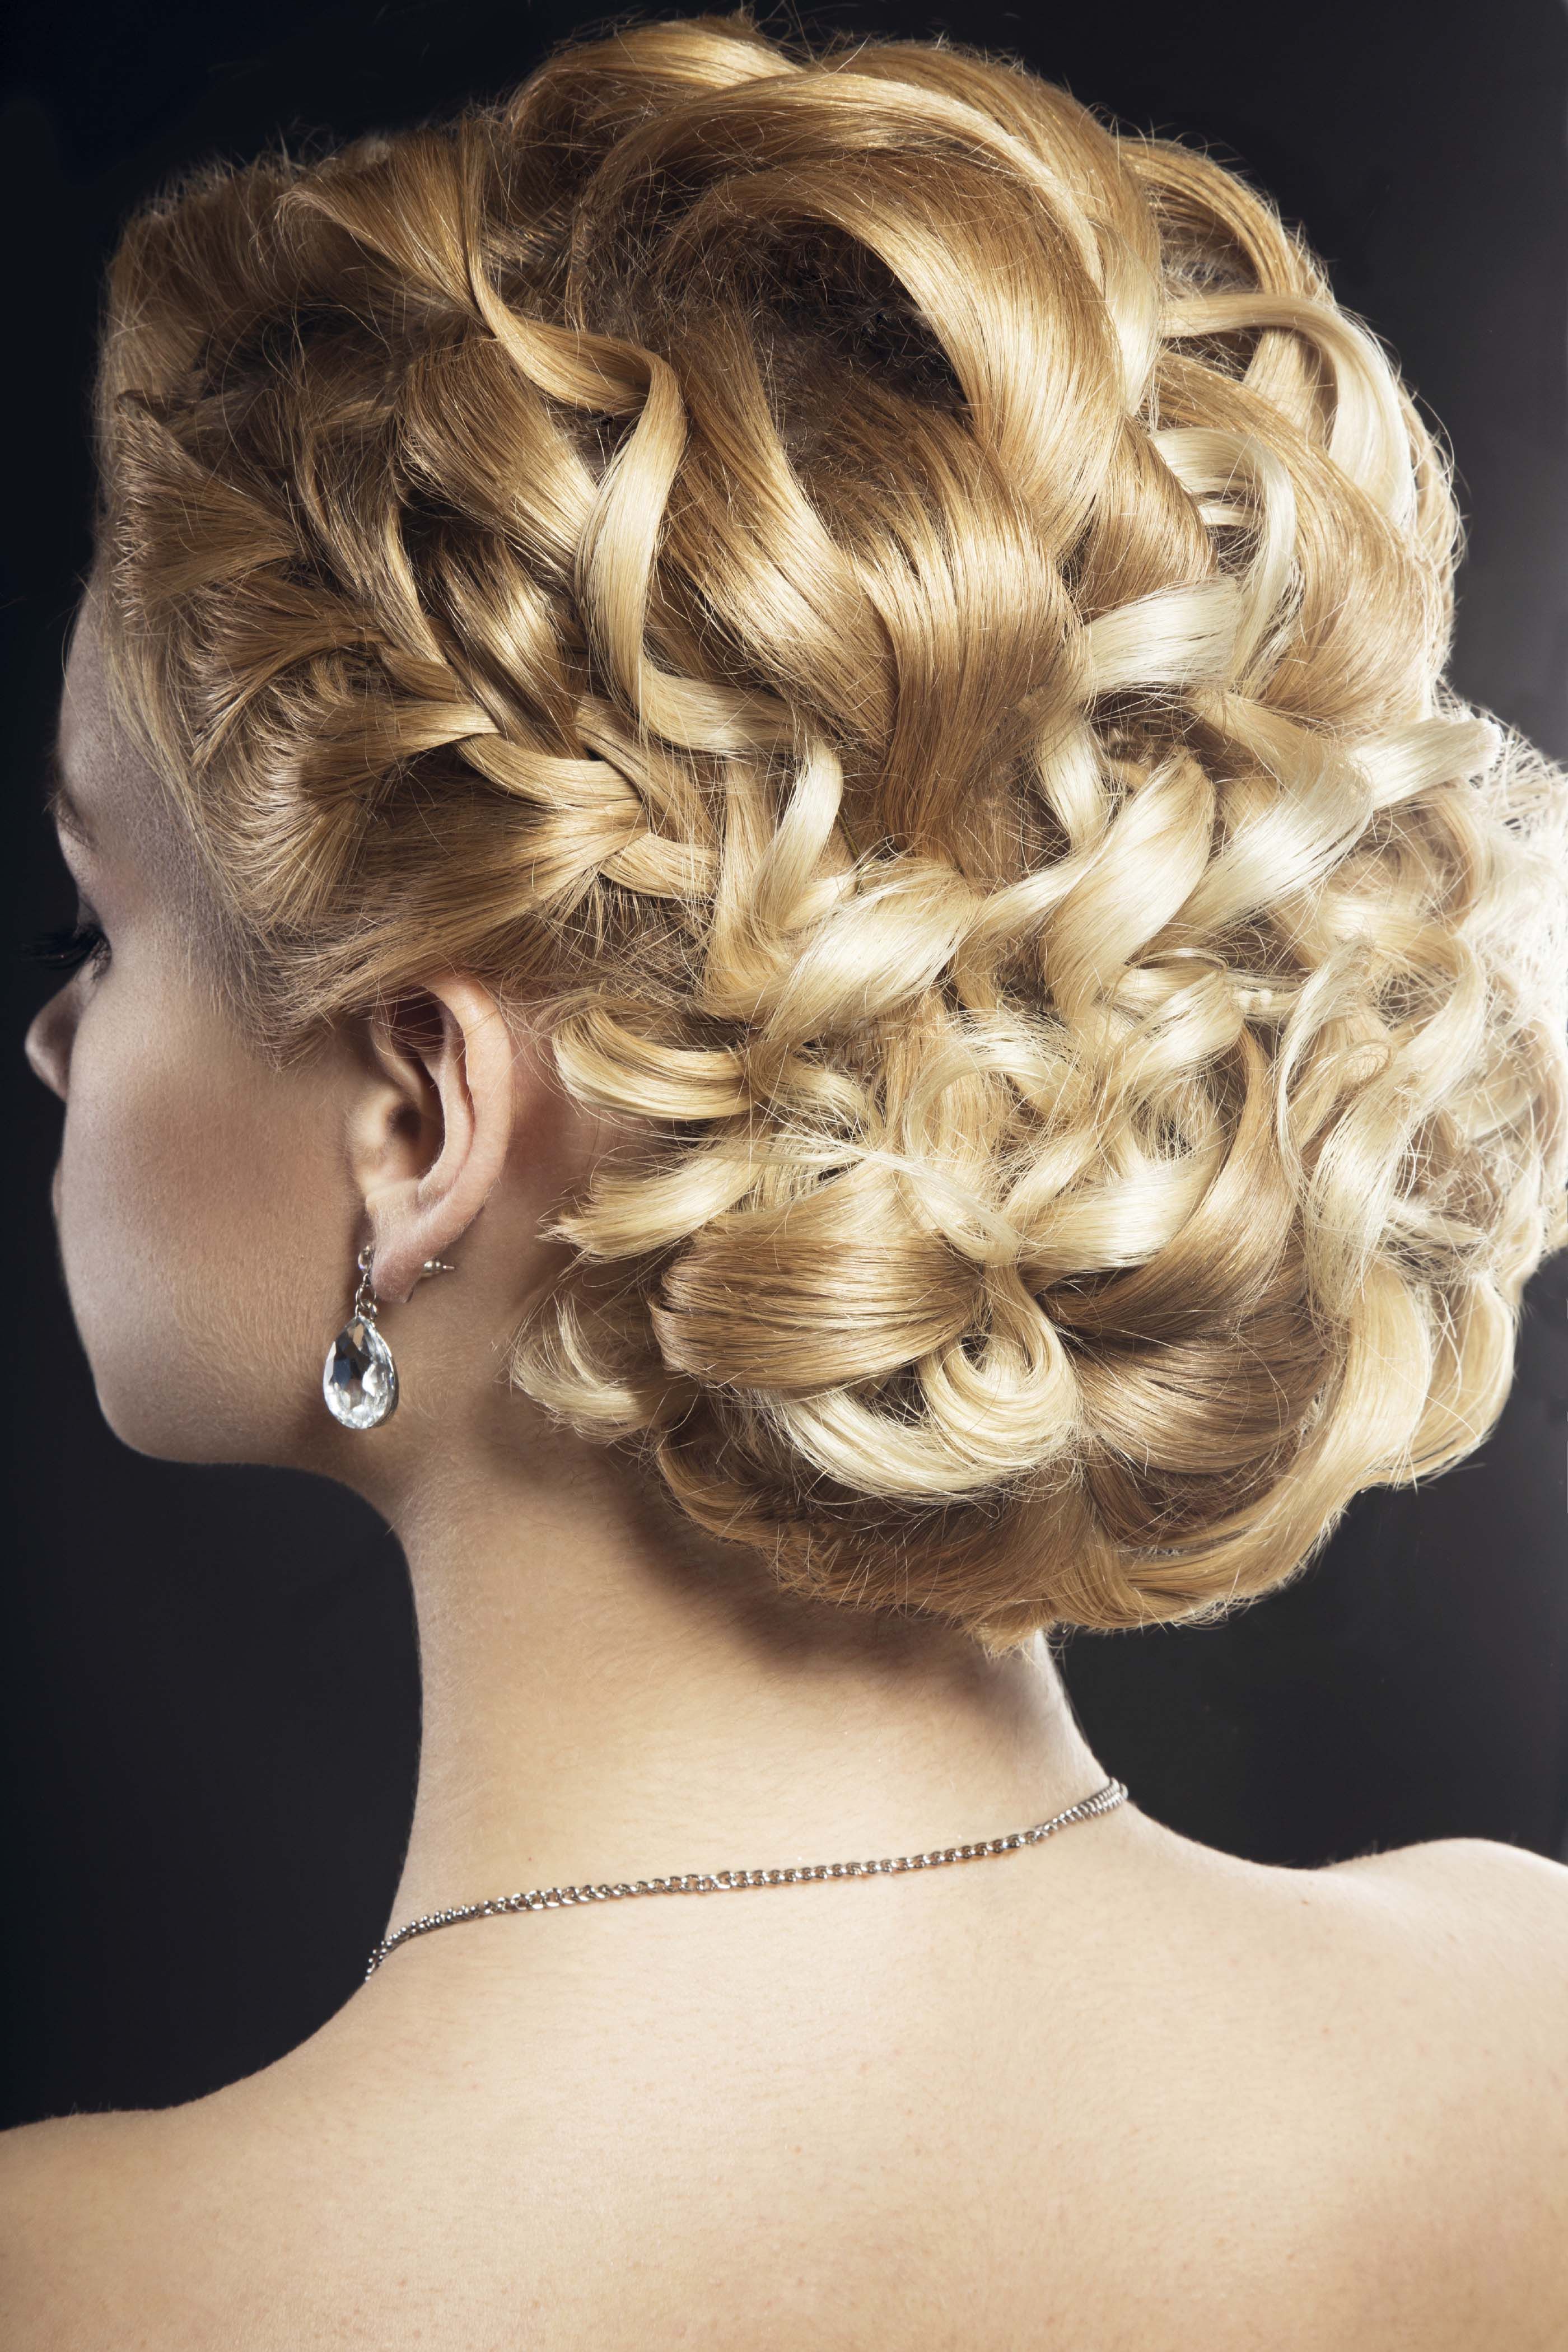 Wedding Updos For Curly Hair: 9 Styles To Inspire Your Wedding Day Look |  All Things Hair Us Within Updo For Long Curly Hair (View 12 of 25)